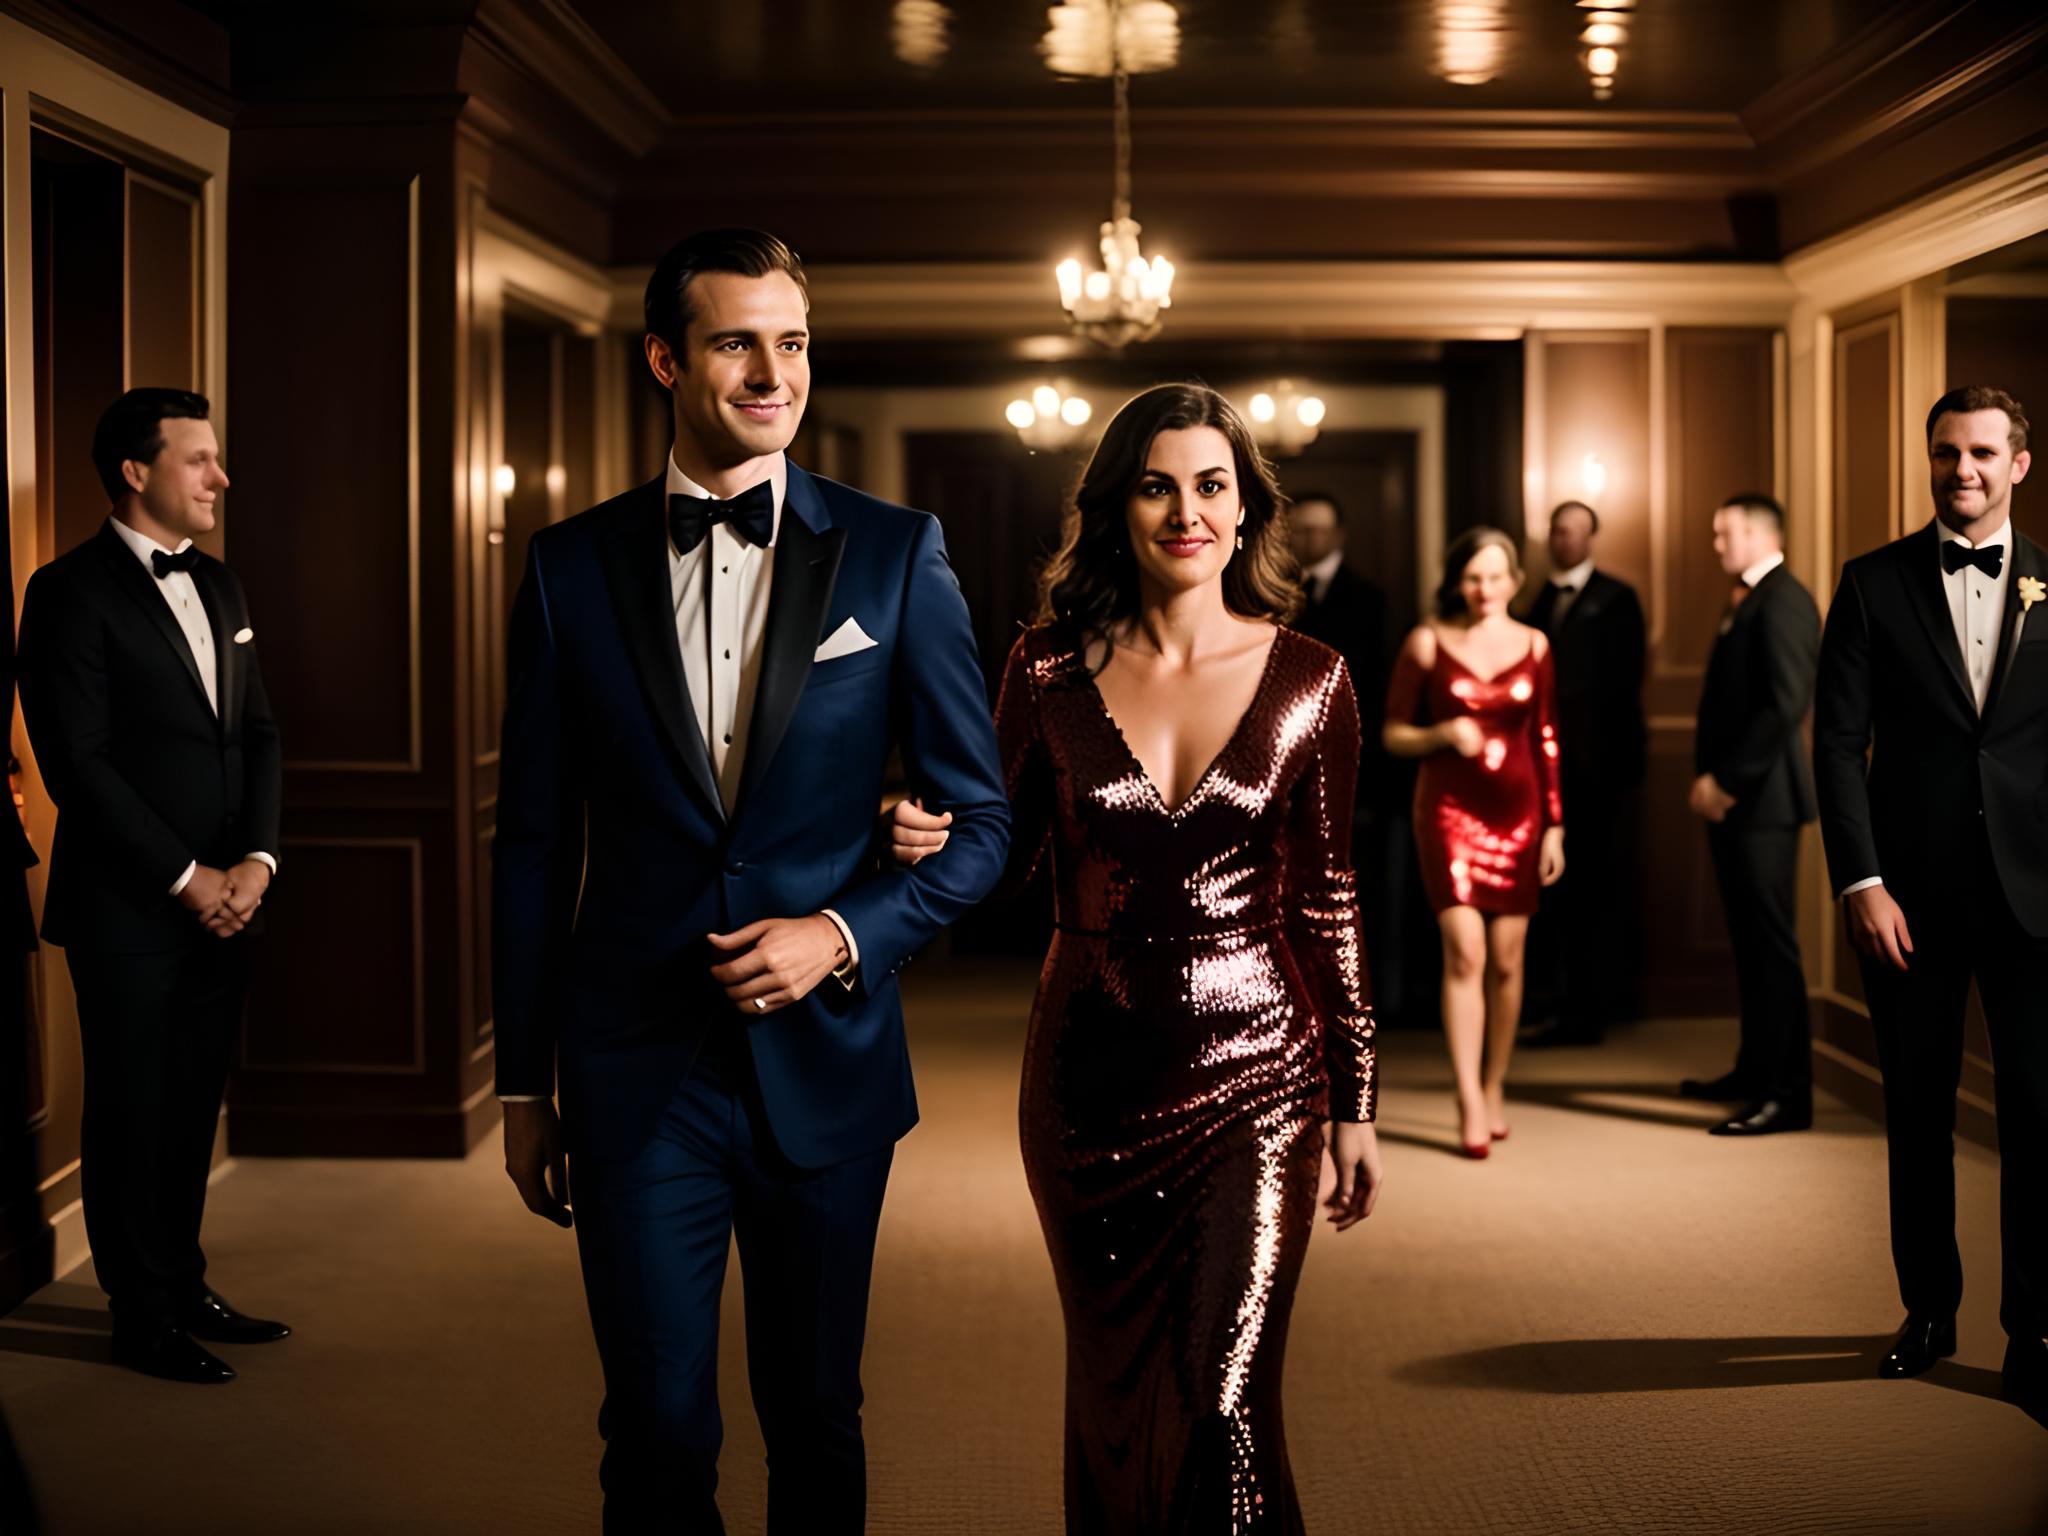 In a dimly lit, upscale club, a woman, dressed in a red sequin dress, her eyes filled with a mix of excitement and apprehension, stands in the center of the room, surrounded by swaying bodies, as her husband, a confident man in a tailored suit, watches with a smug smile from the shadows, as they both navigate the uncharted waters of non-monogamy and the swirling emotions that come with it.